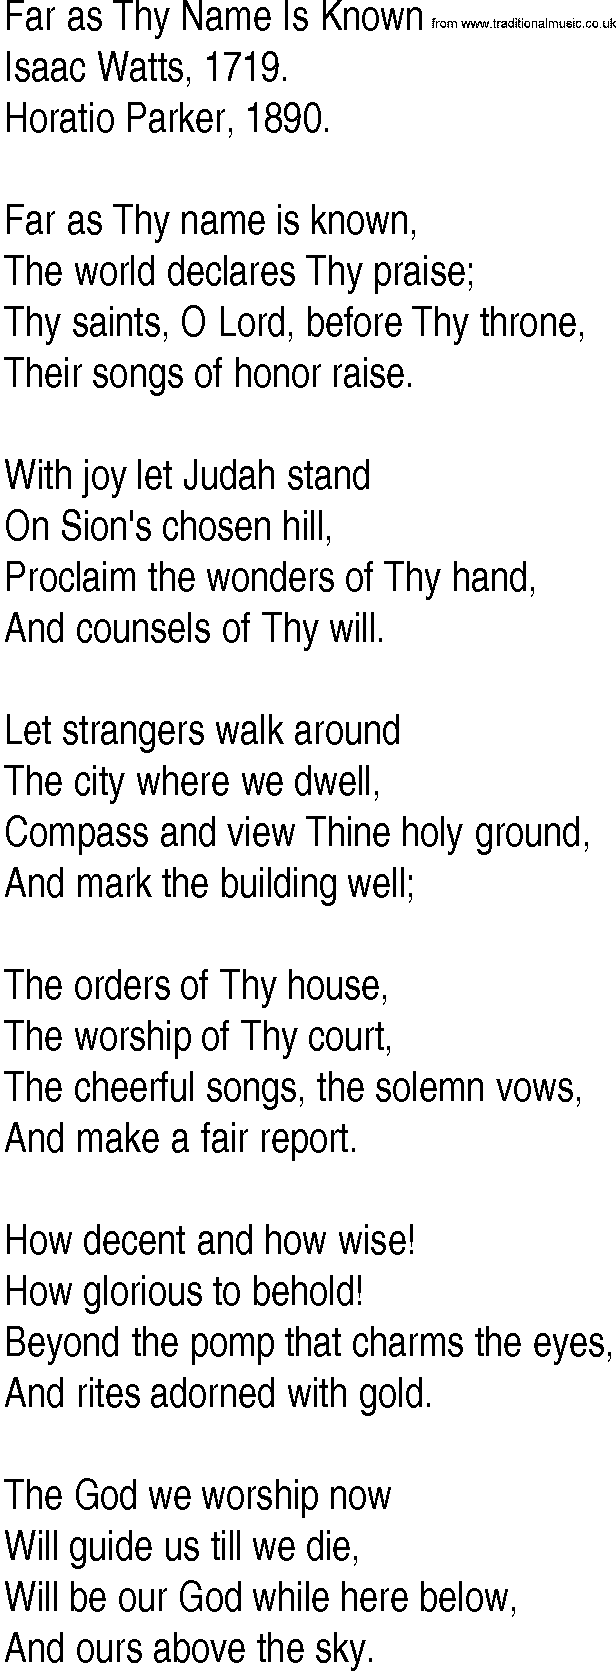 Hymn and Gospel Song: Far as Thy Name Is Known by Isaac Watts lyrics